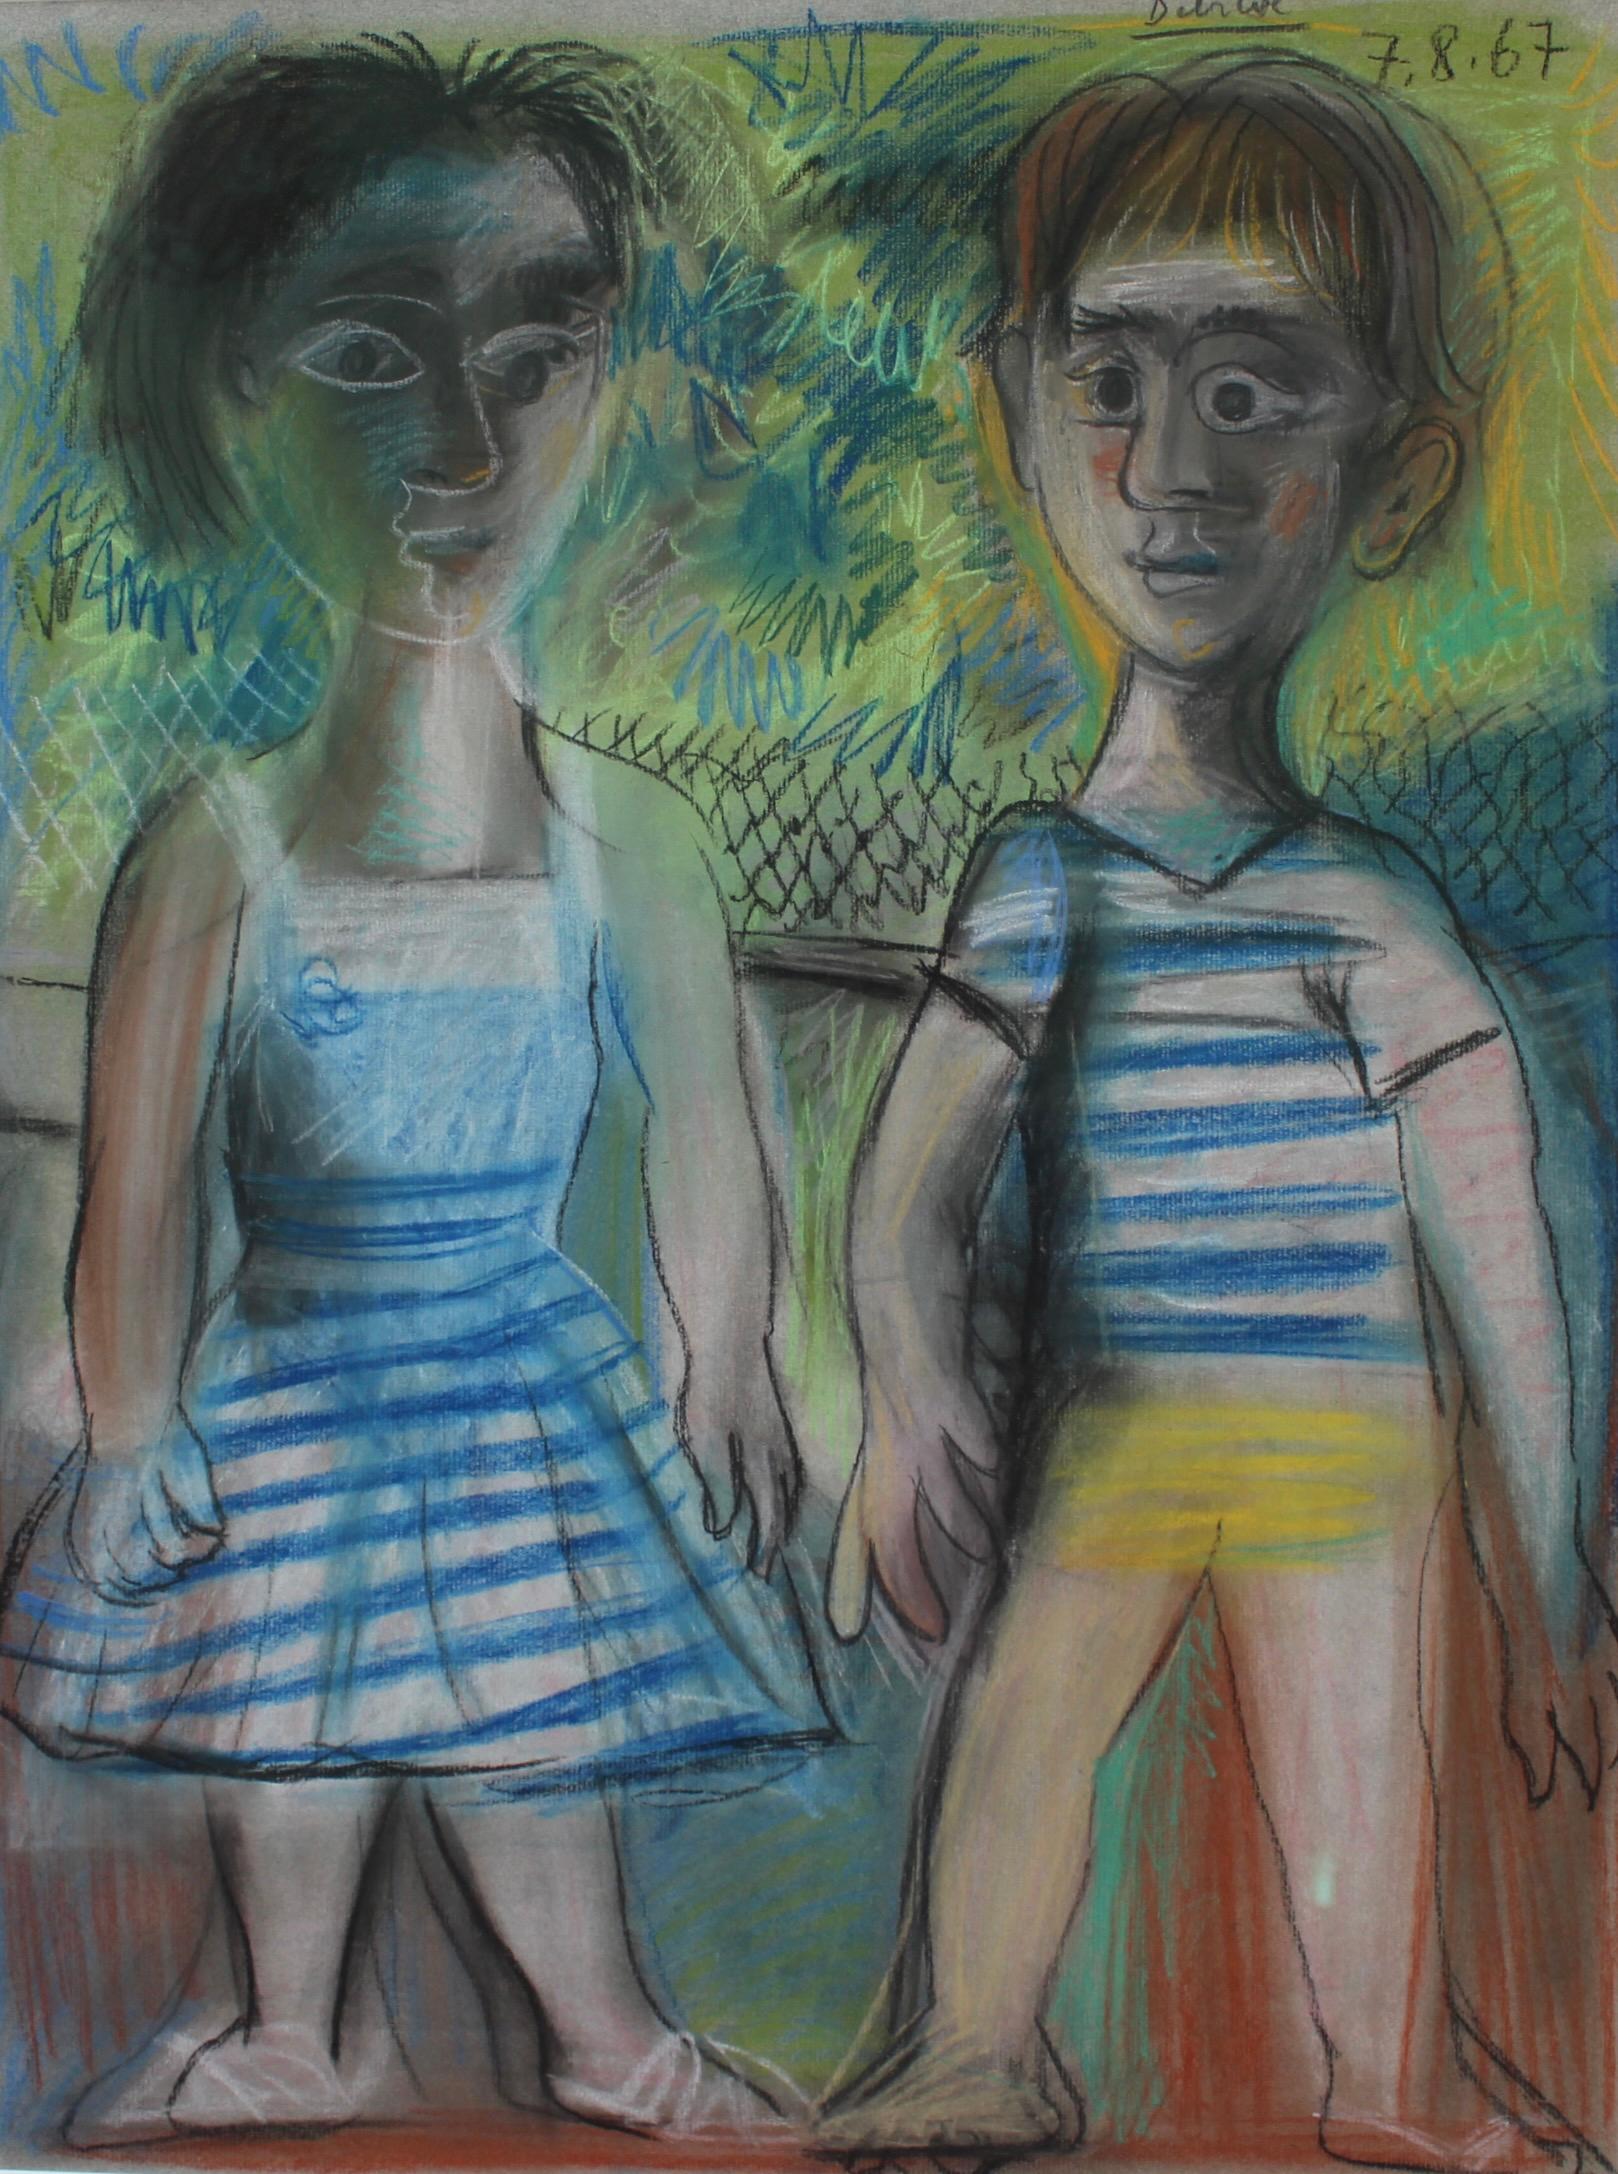 'The Kids', pastel on paper (1967), by Raymond Dèbieve. Picasso's influence is undeniable in this artwork yet Dèbieve's own naive artistic style is on display as well. Two young siblings are depicted standing in what appears to be their back garden,